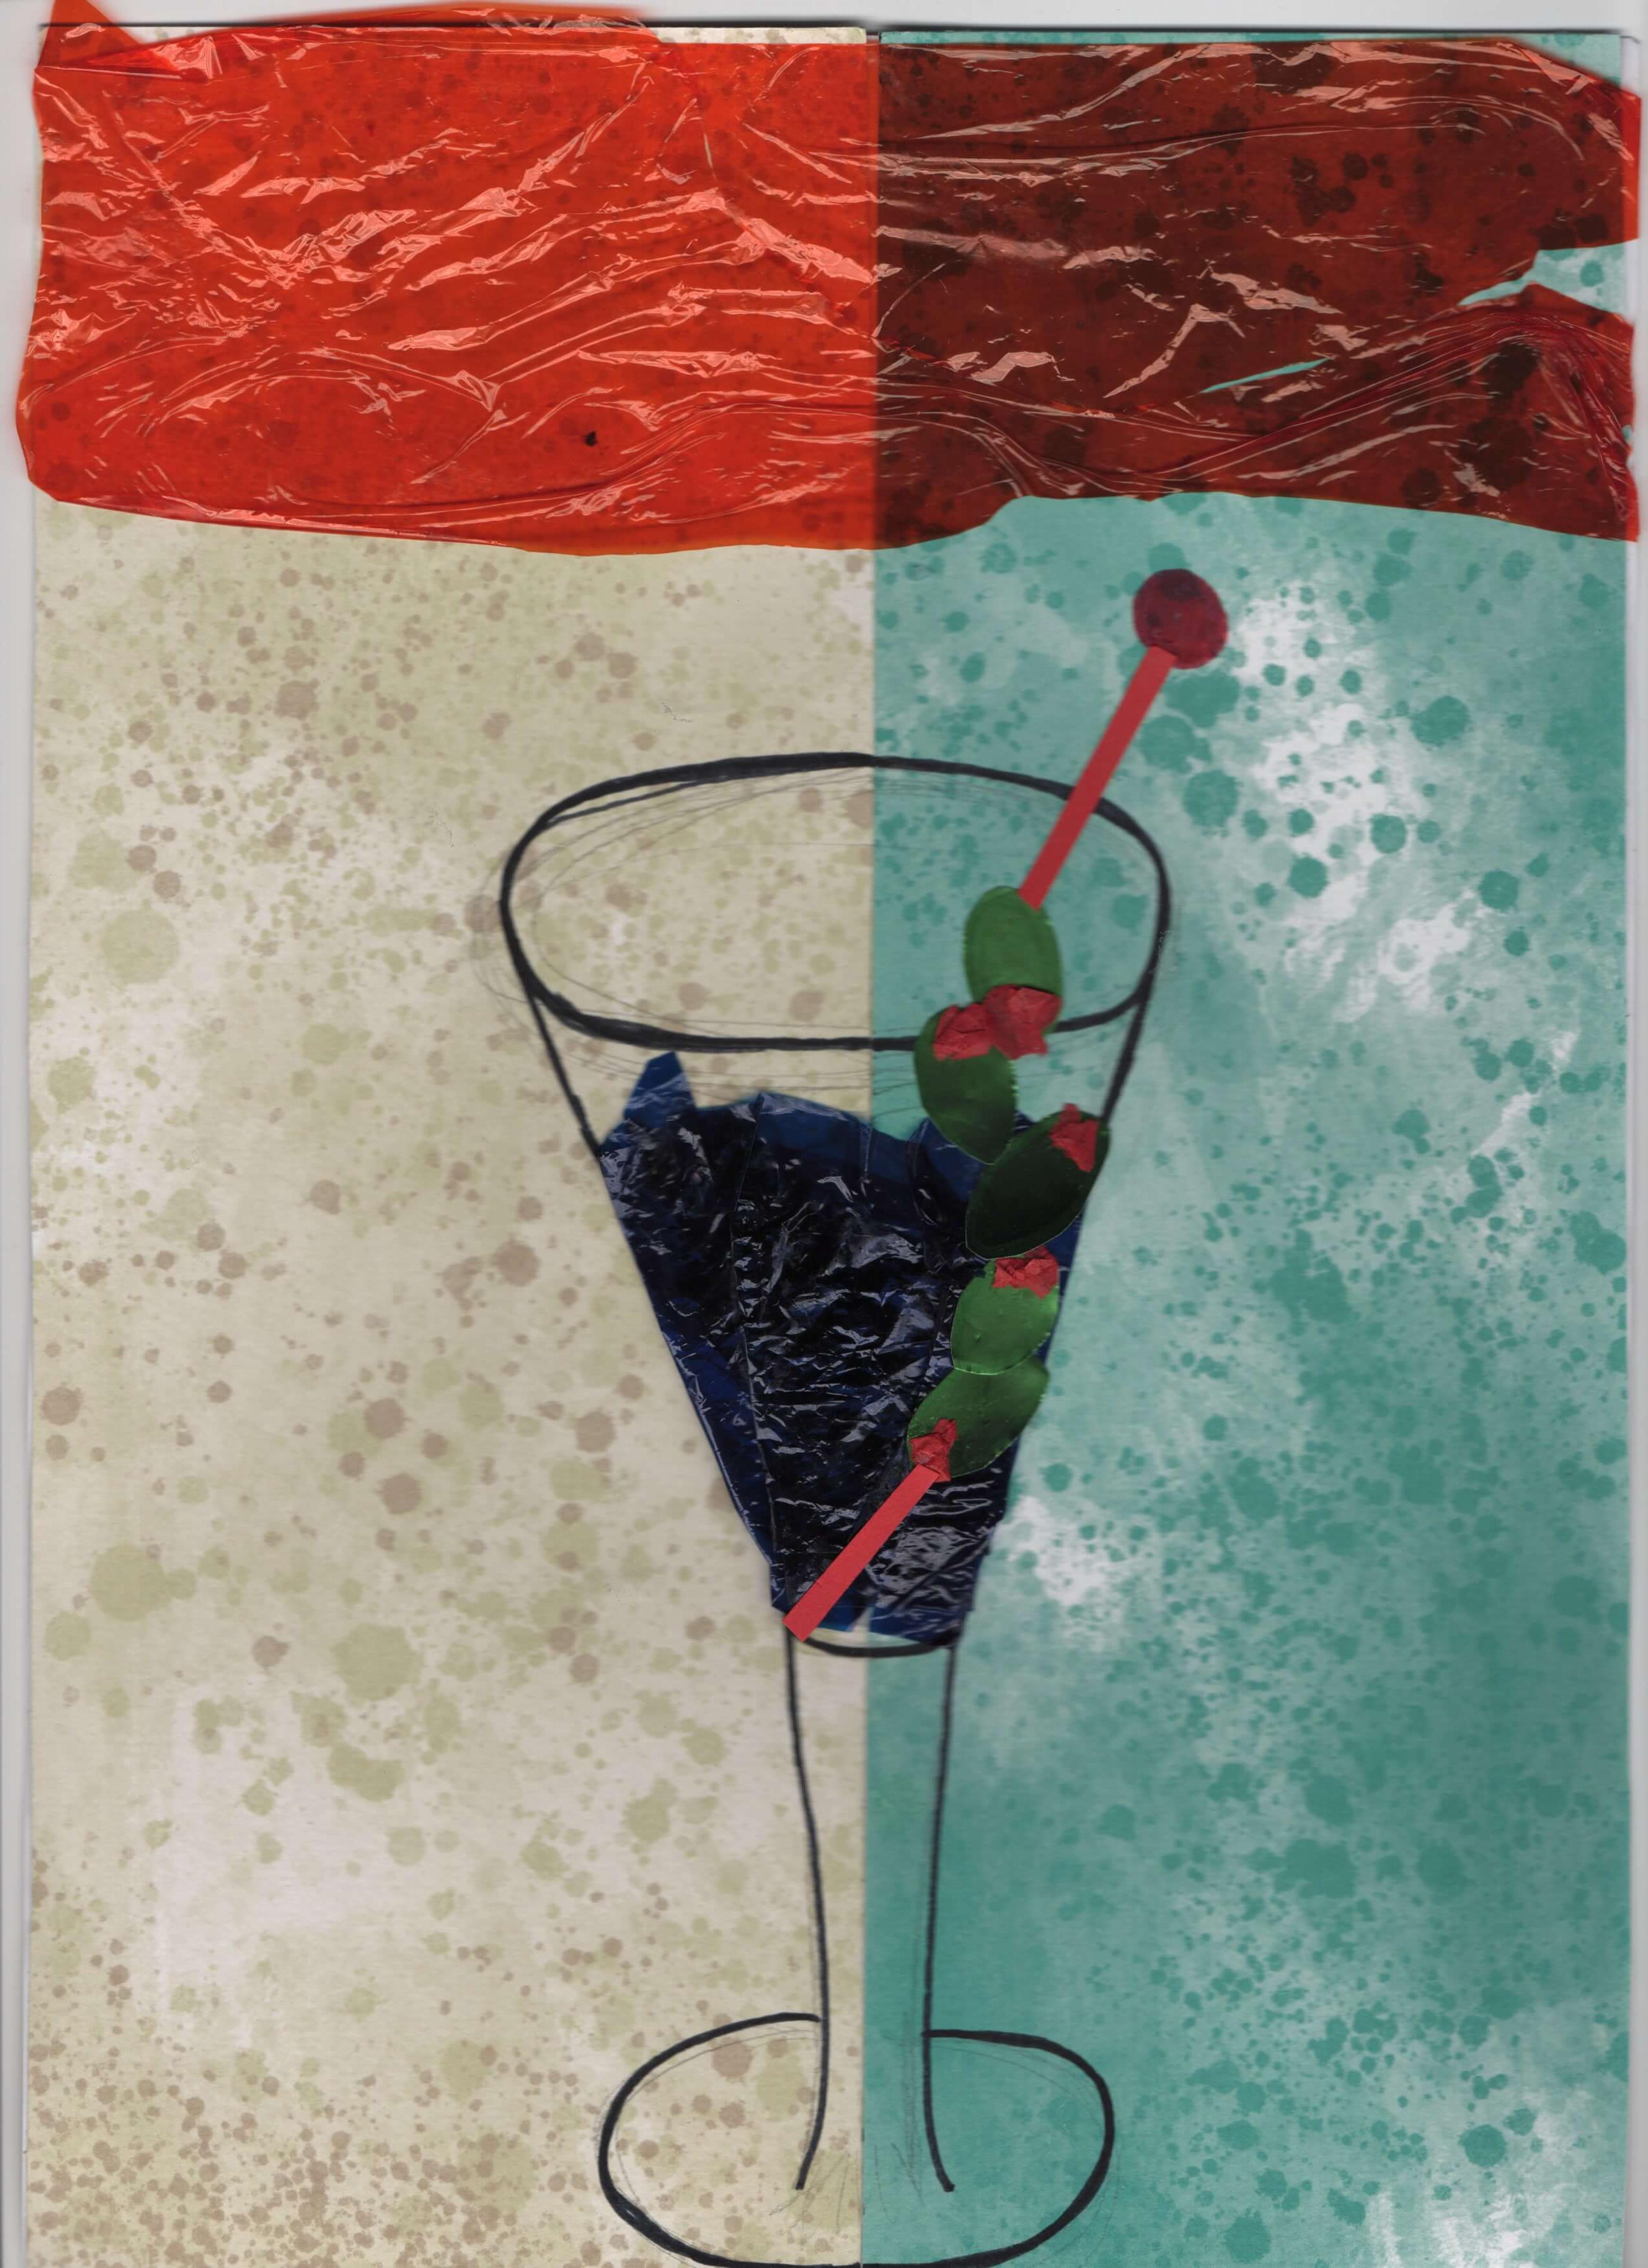 An olive martini drawn against a textured collage paper backdrop.